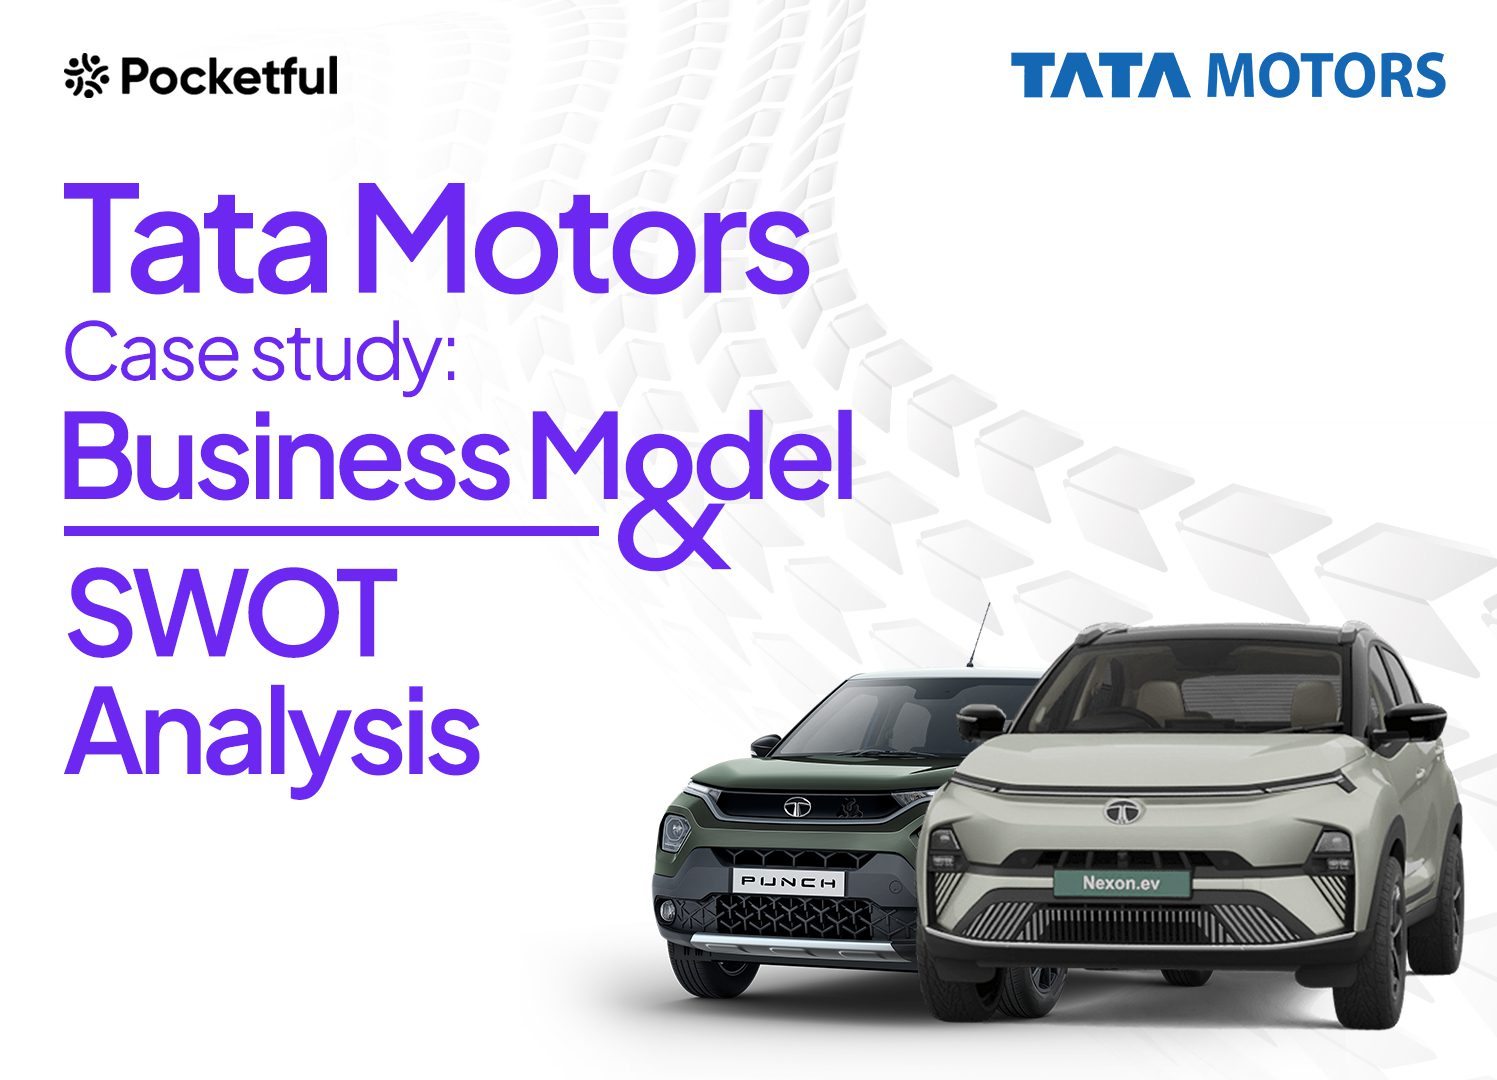 Tata Motors Case Study: History, Business Model, Products, Financials, Peers, and SWOT Analysis